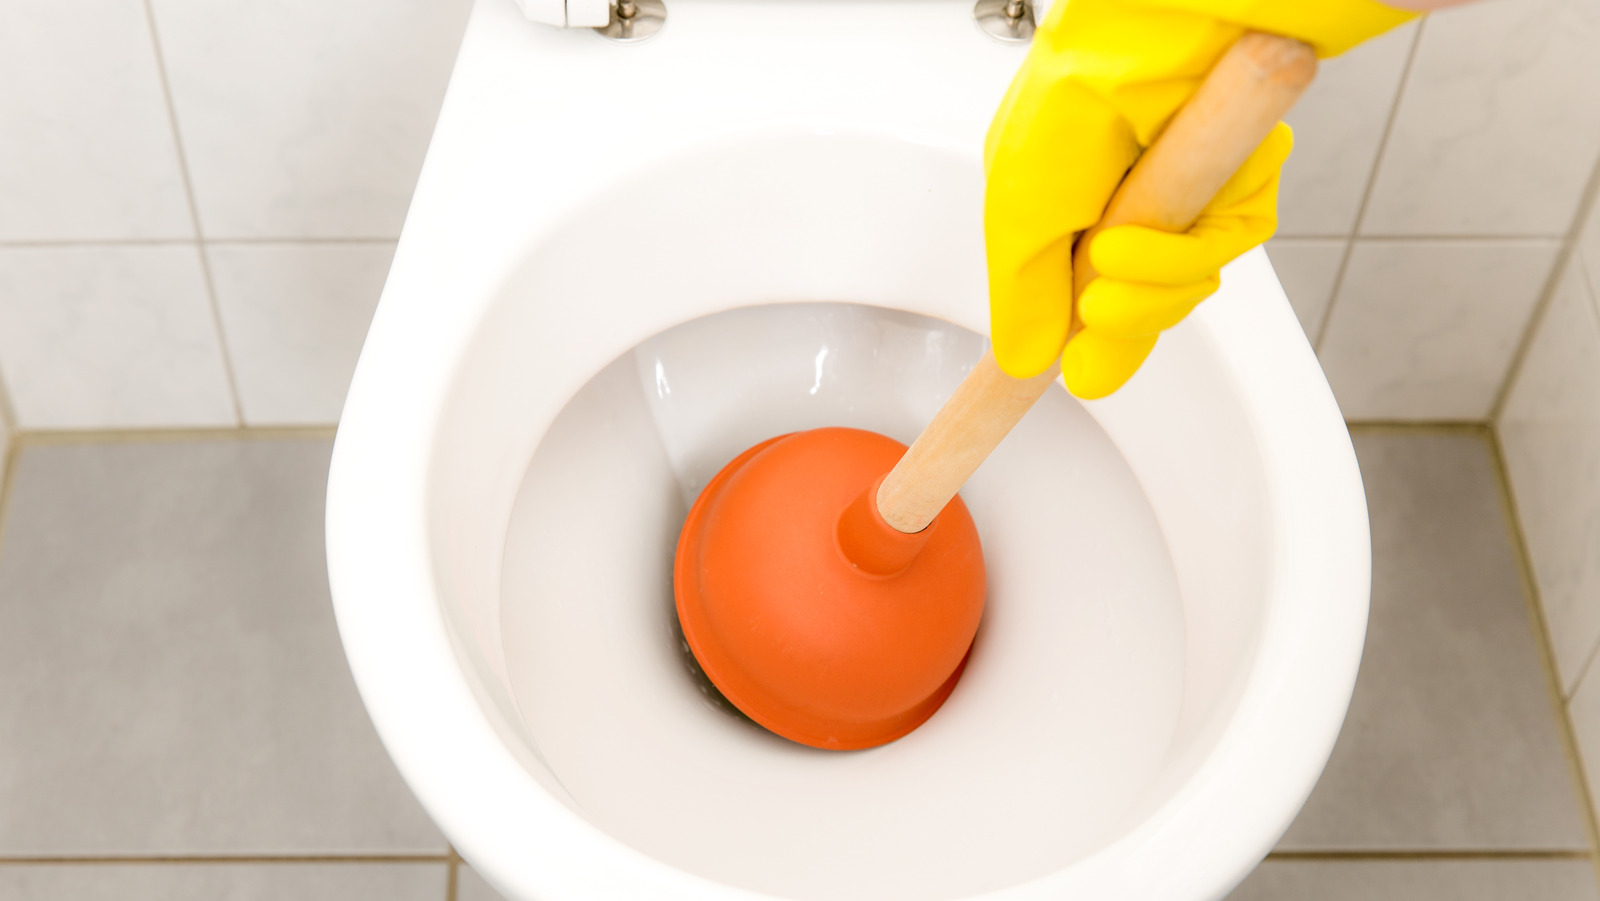 How to clean a toilet brush: 42p 'holy grail' product to remove buildup  'fast